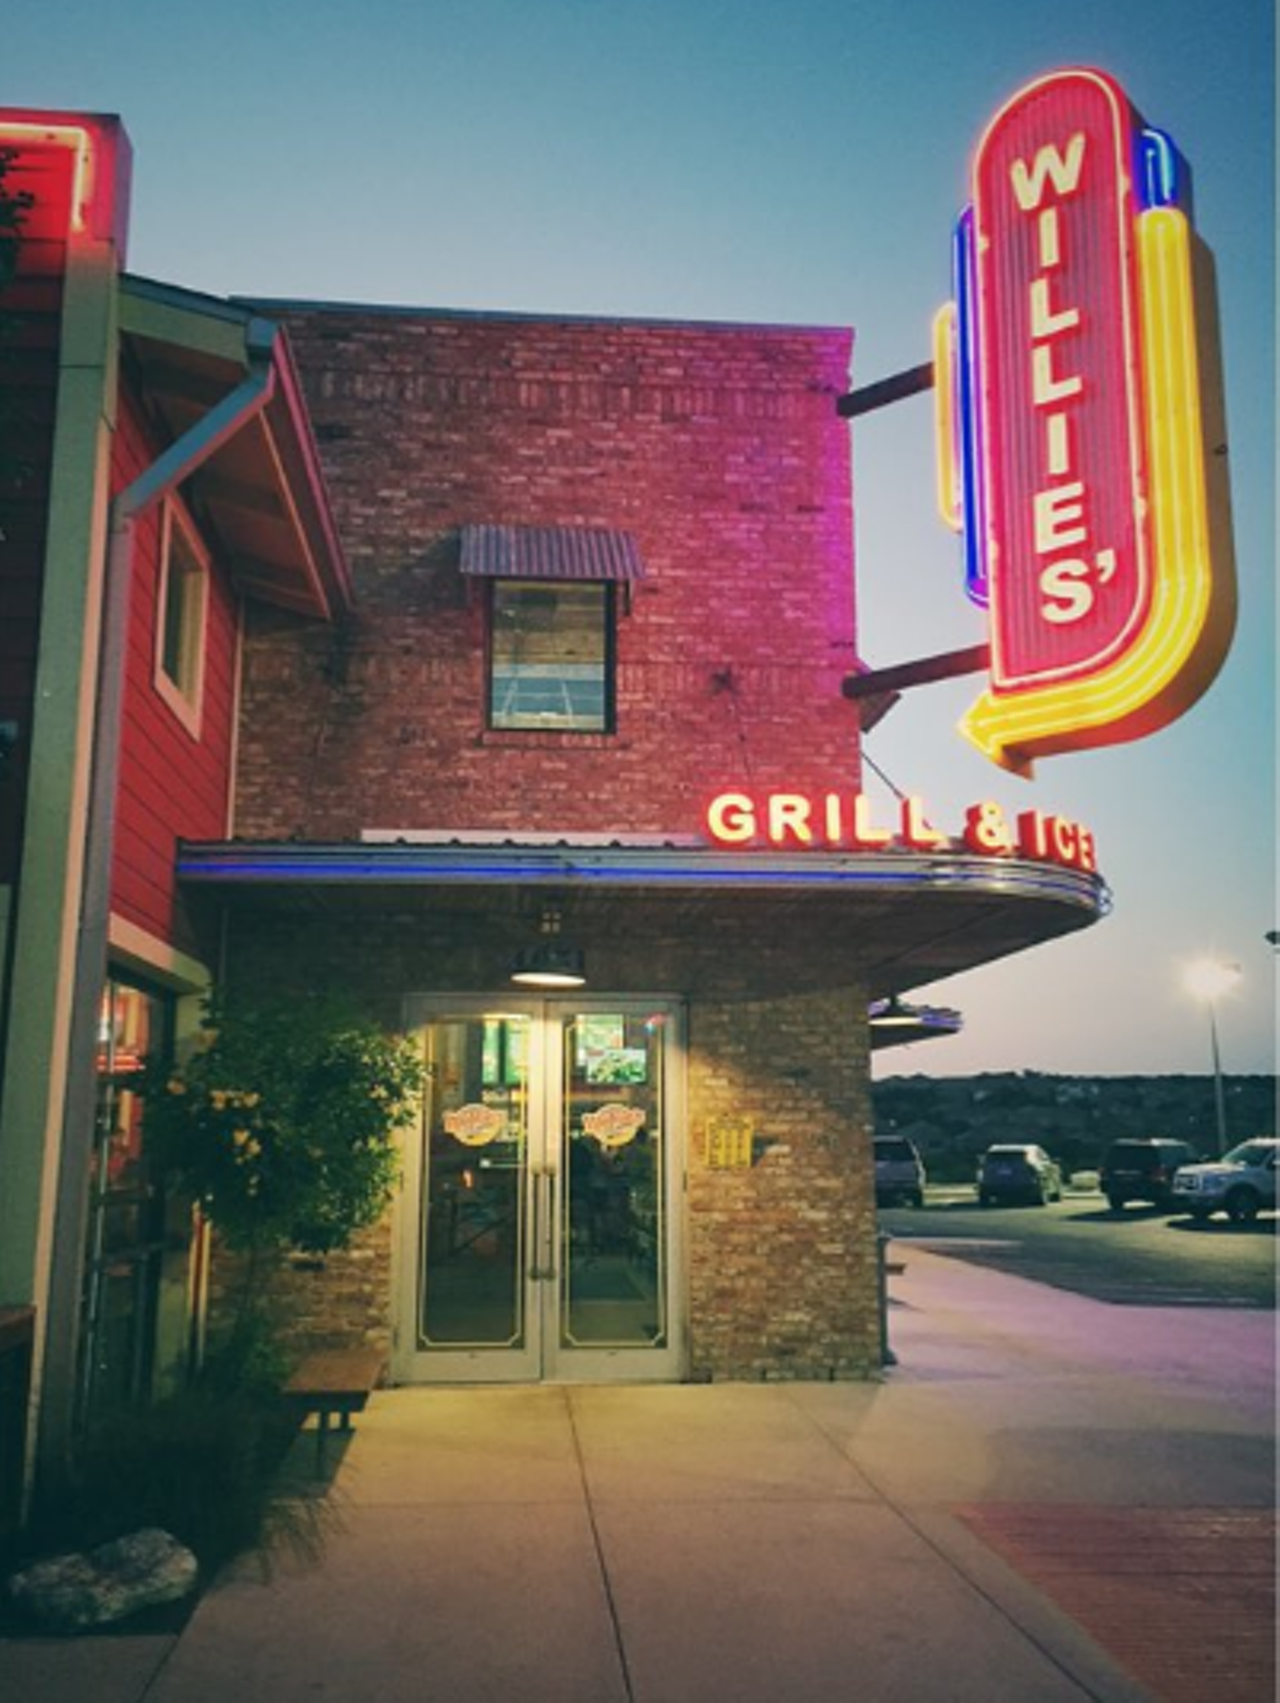  Willie's Grill & Icehouse
multiple locations
With three locations in San Antonio and one in New Bruanfels, Willie's is an accessible hangout for families with kids. There's a sandbox for the little ones, and beer and wine for the grownups. 
Photo via Instagram/annamarijka